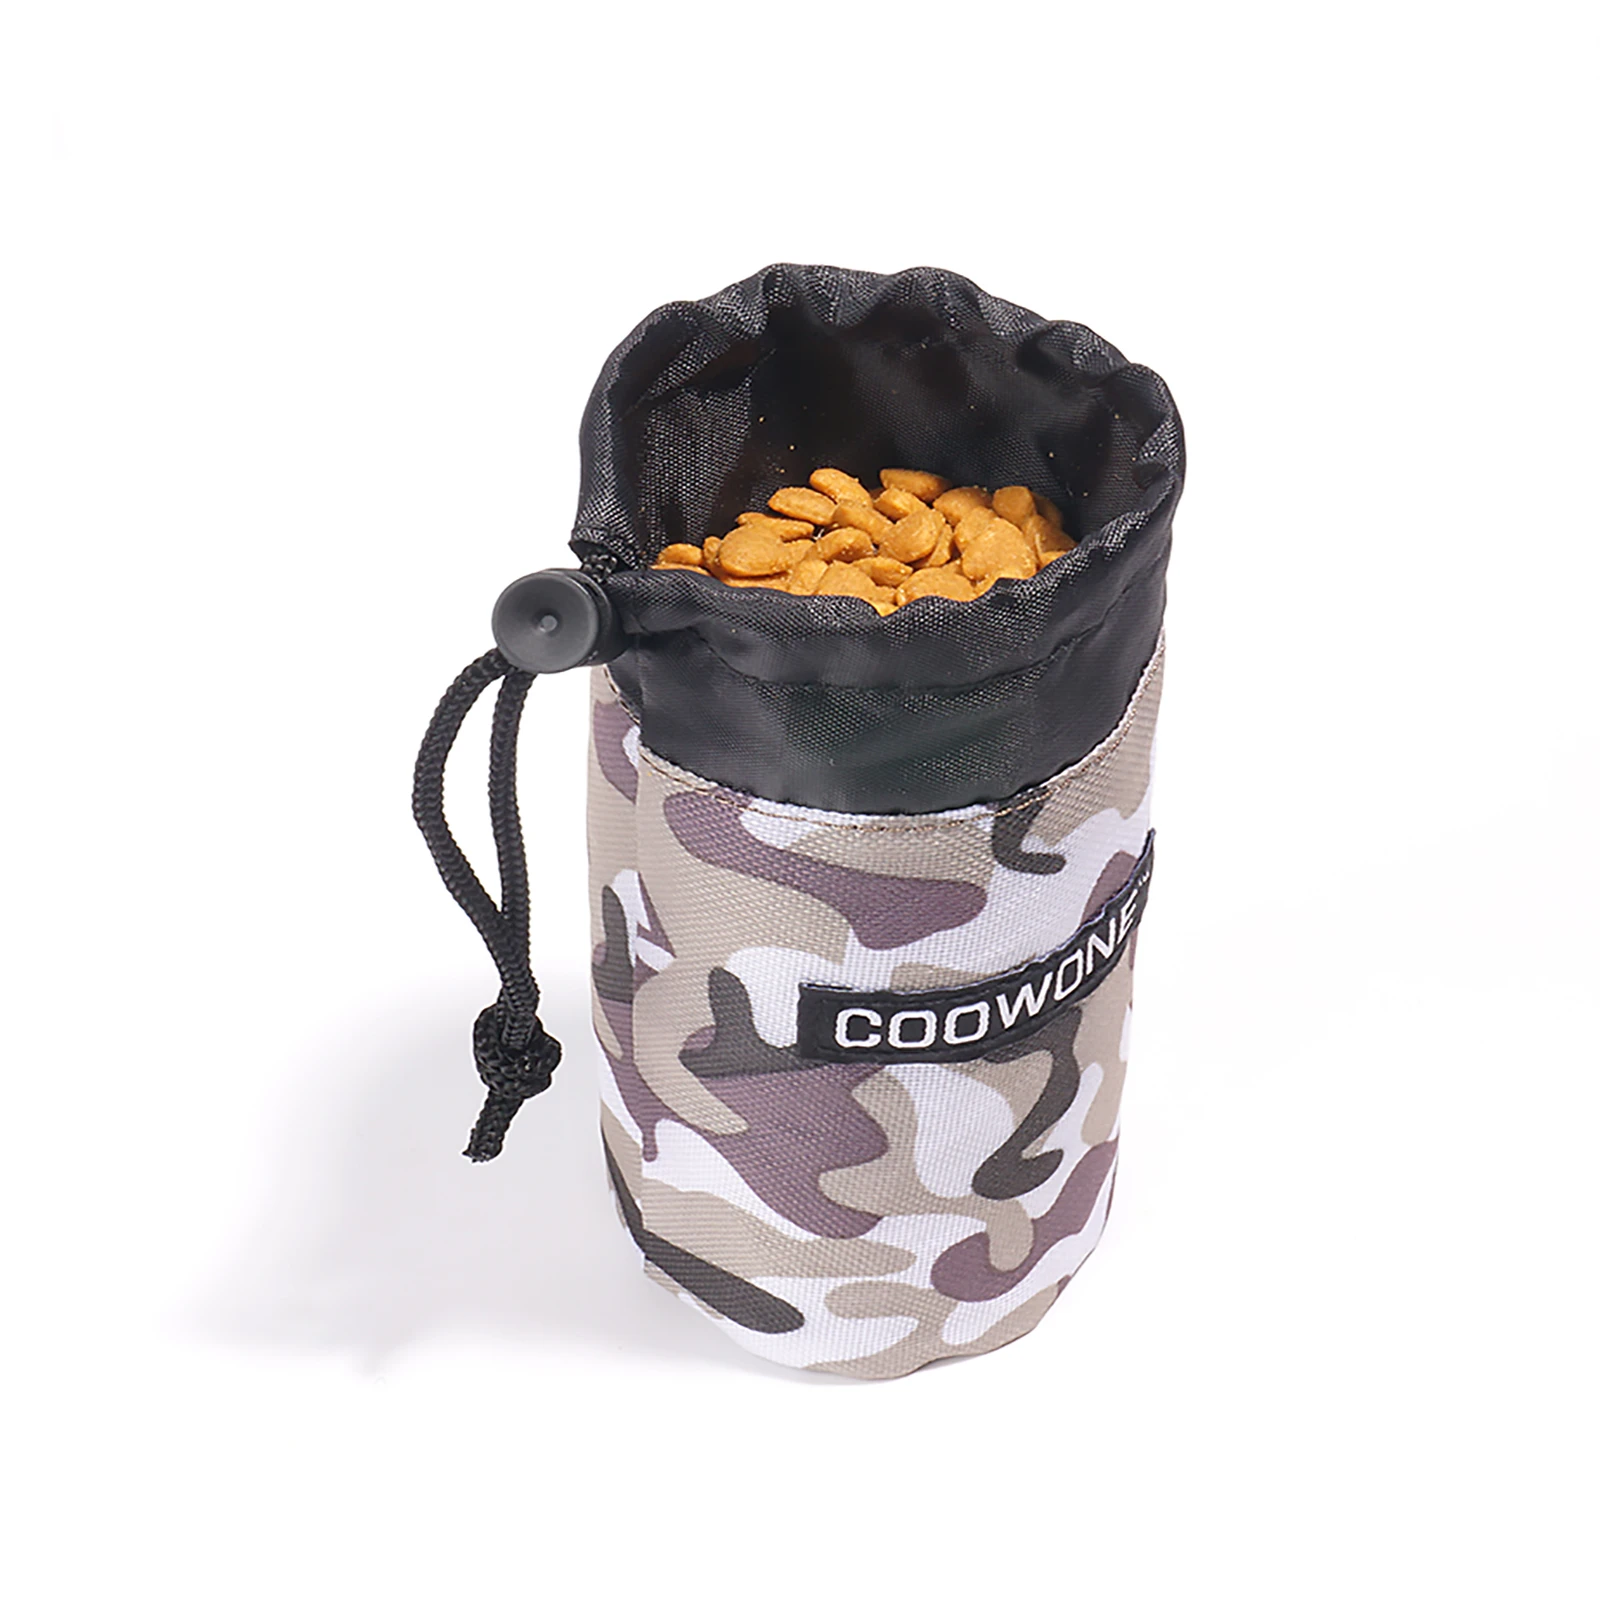 Waterproof Camouflage Oxford Fabric Cloth Pet Puppy Dog Training Treat Bag Snack Bait Obedience Food Pouch Holder Pocket